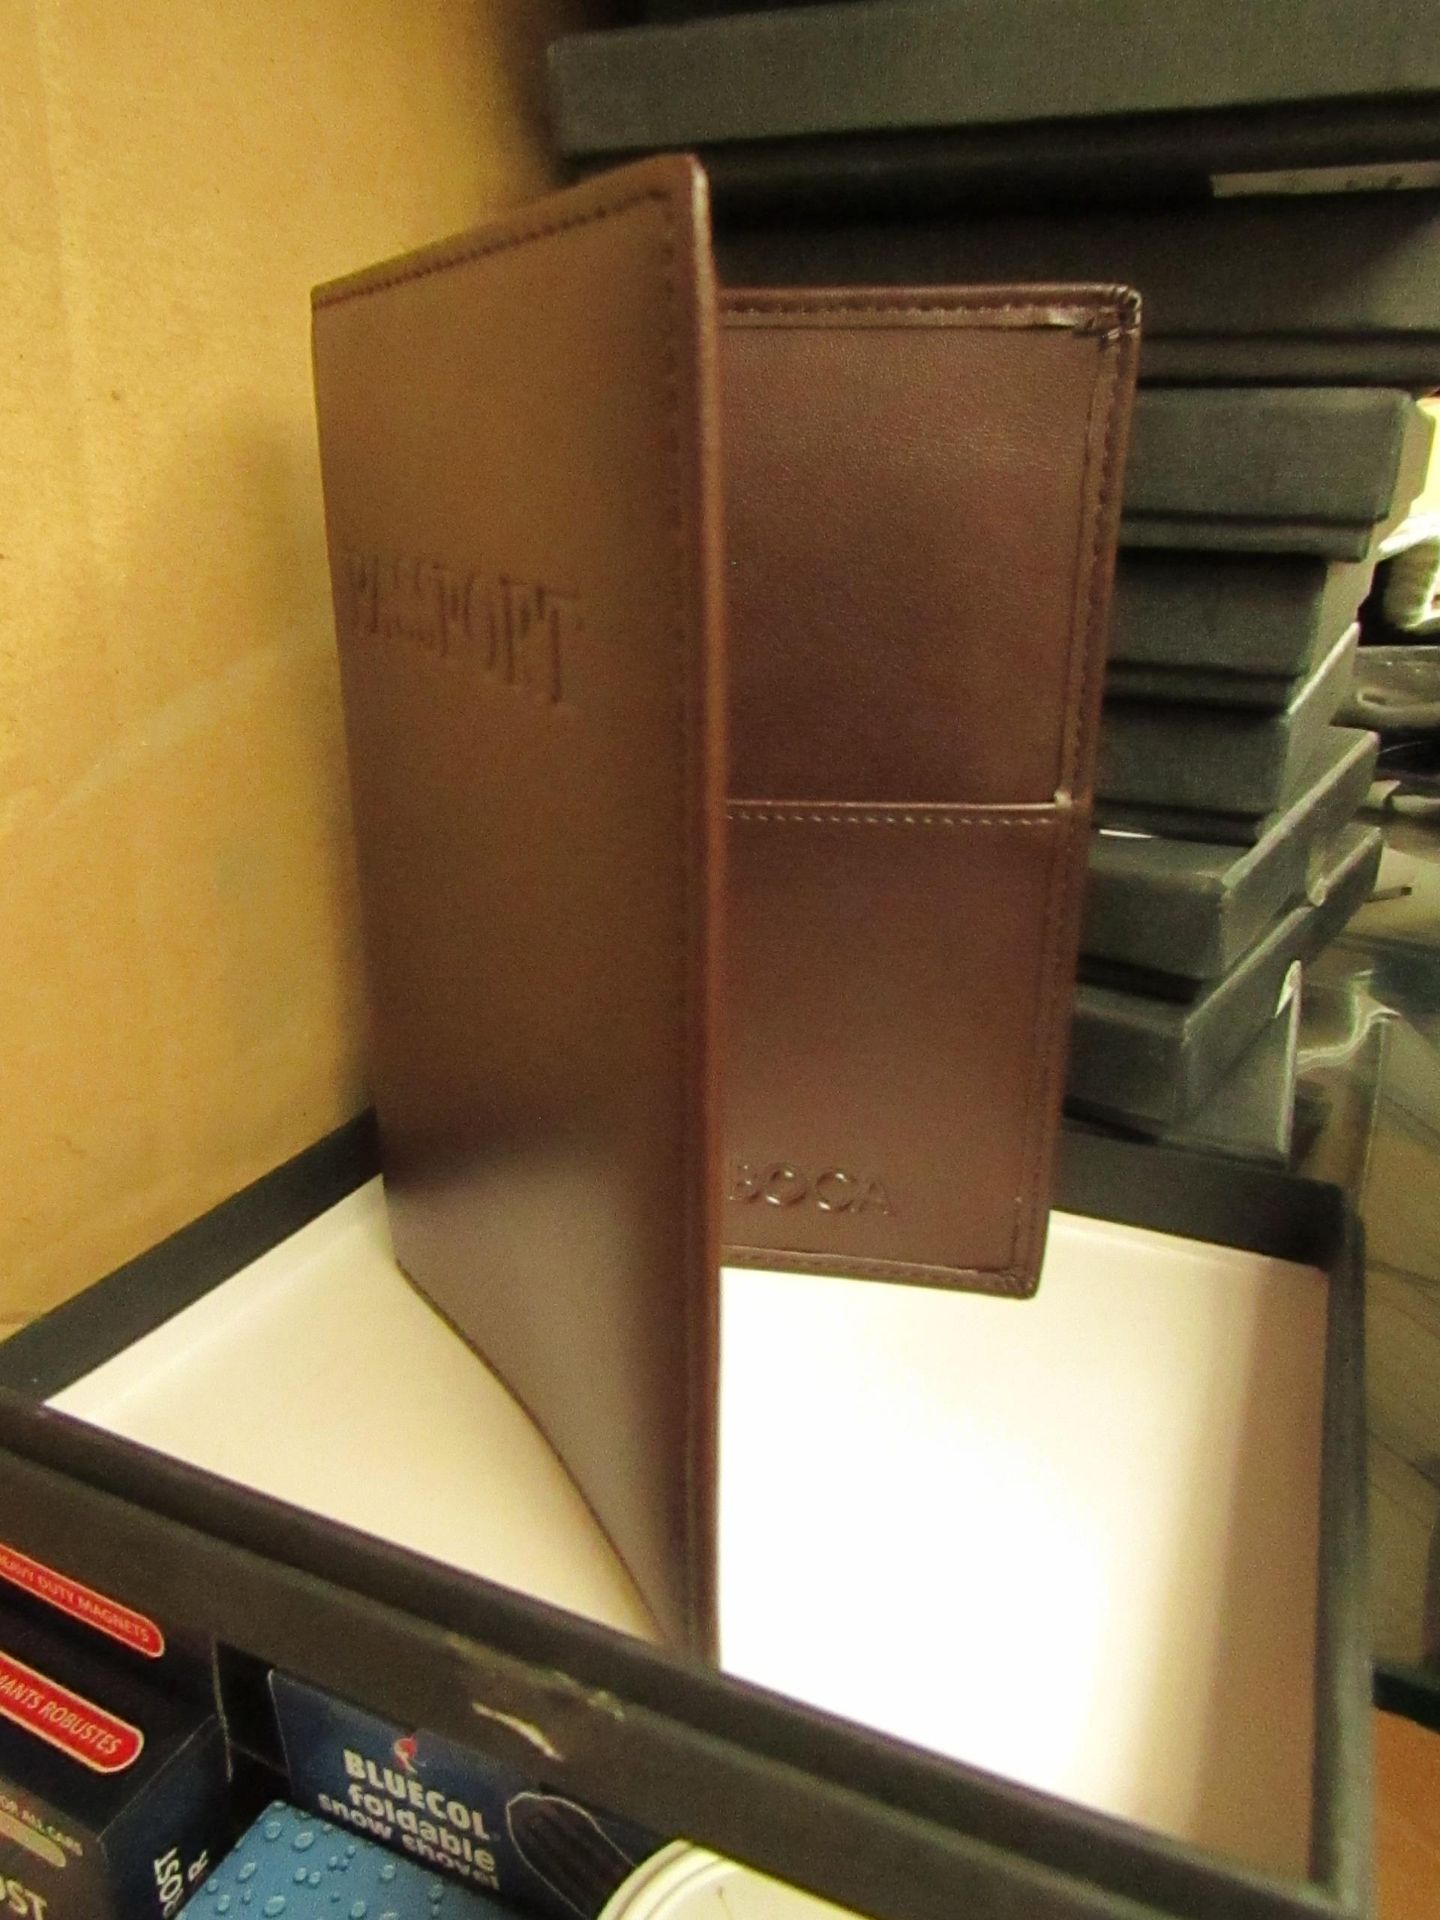 5 x Boca Passport Wallets with Credit Card/ID  Slots and RFID Blocking Technology to prevent